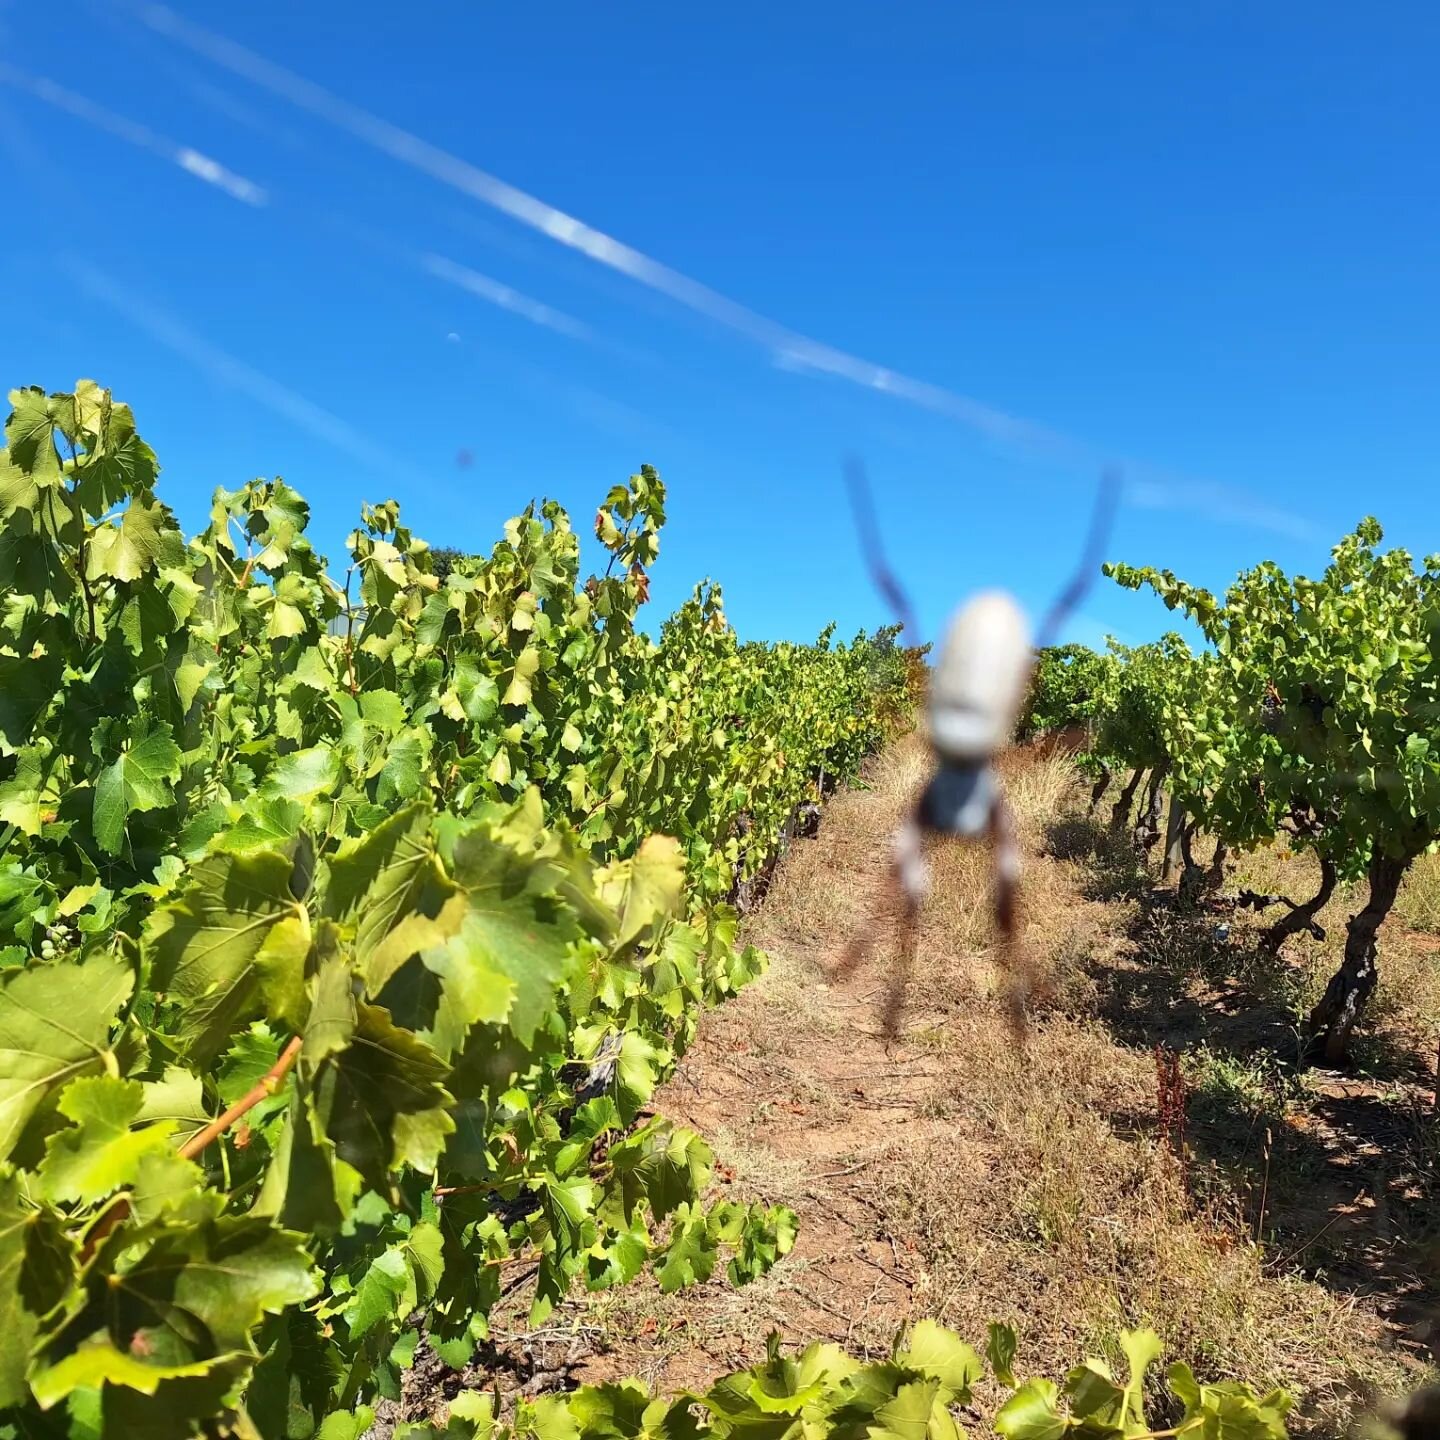 Spiders play an important role in managing insects naturally, like this golden orb weaving spider in the old grenache vineyard. Just make sure you keep an eye out! 

#barossavalley #barossa #oldvinegrenache #goldenorbweaver #oldvines #goldenorbspider